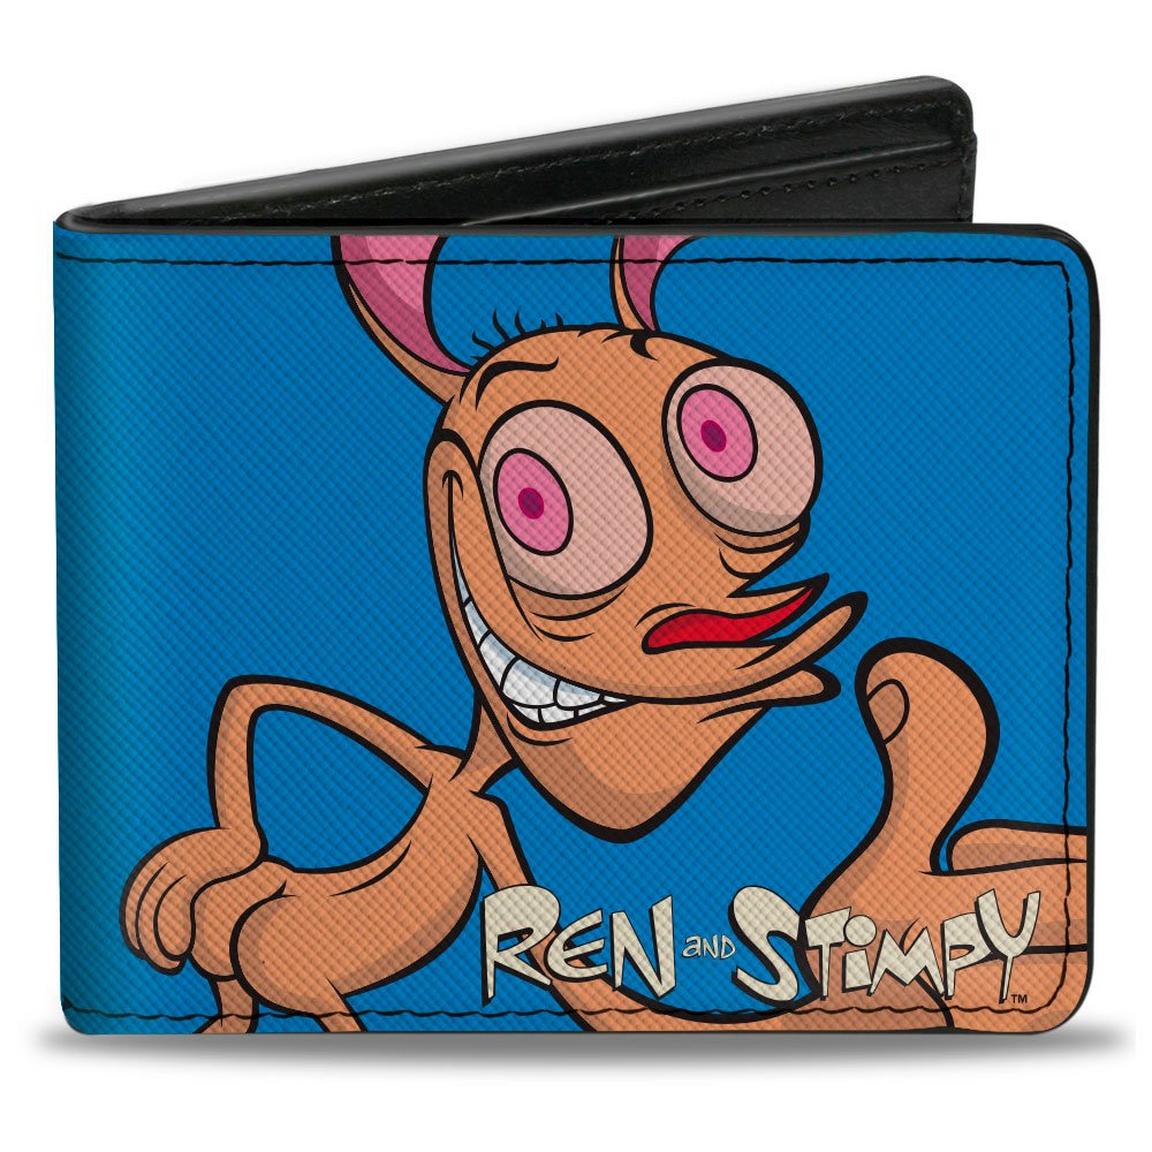 Buckle-Down Nickelodeon The Ren and Stimpy Show Vegan Leather Bifold Wallet, Size: One Size, Buckle Down